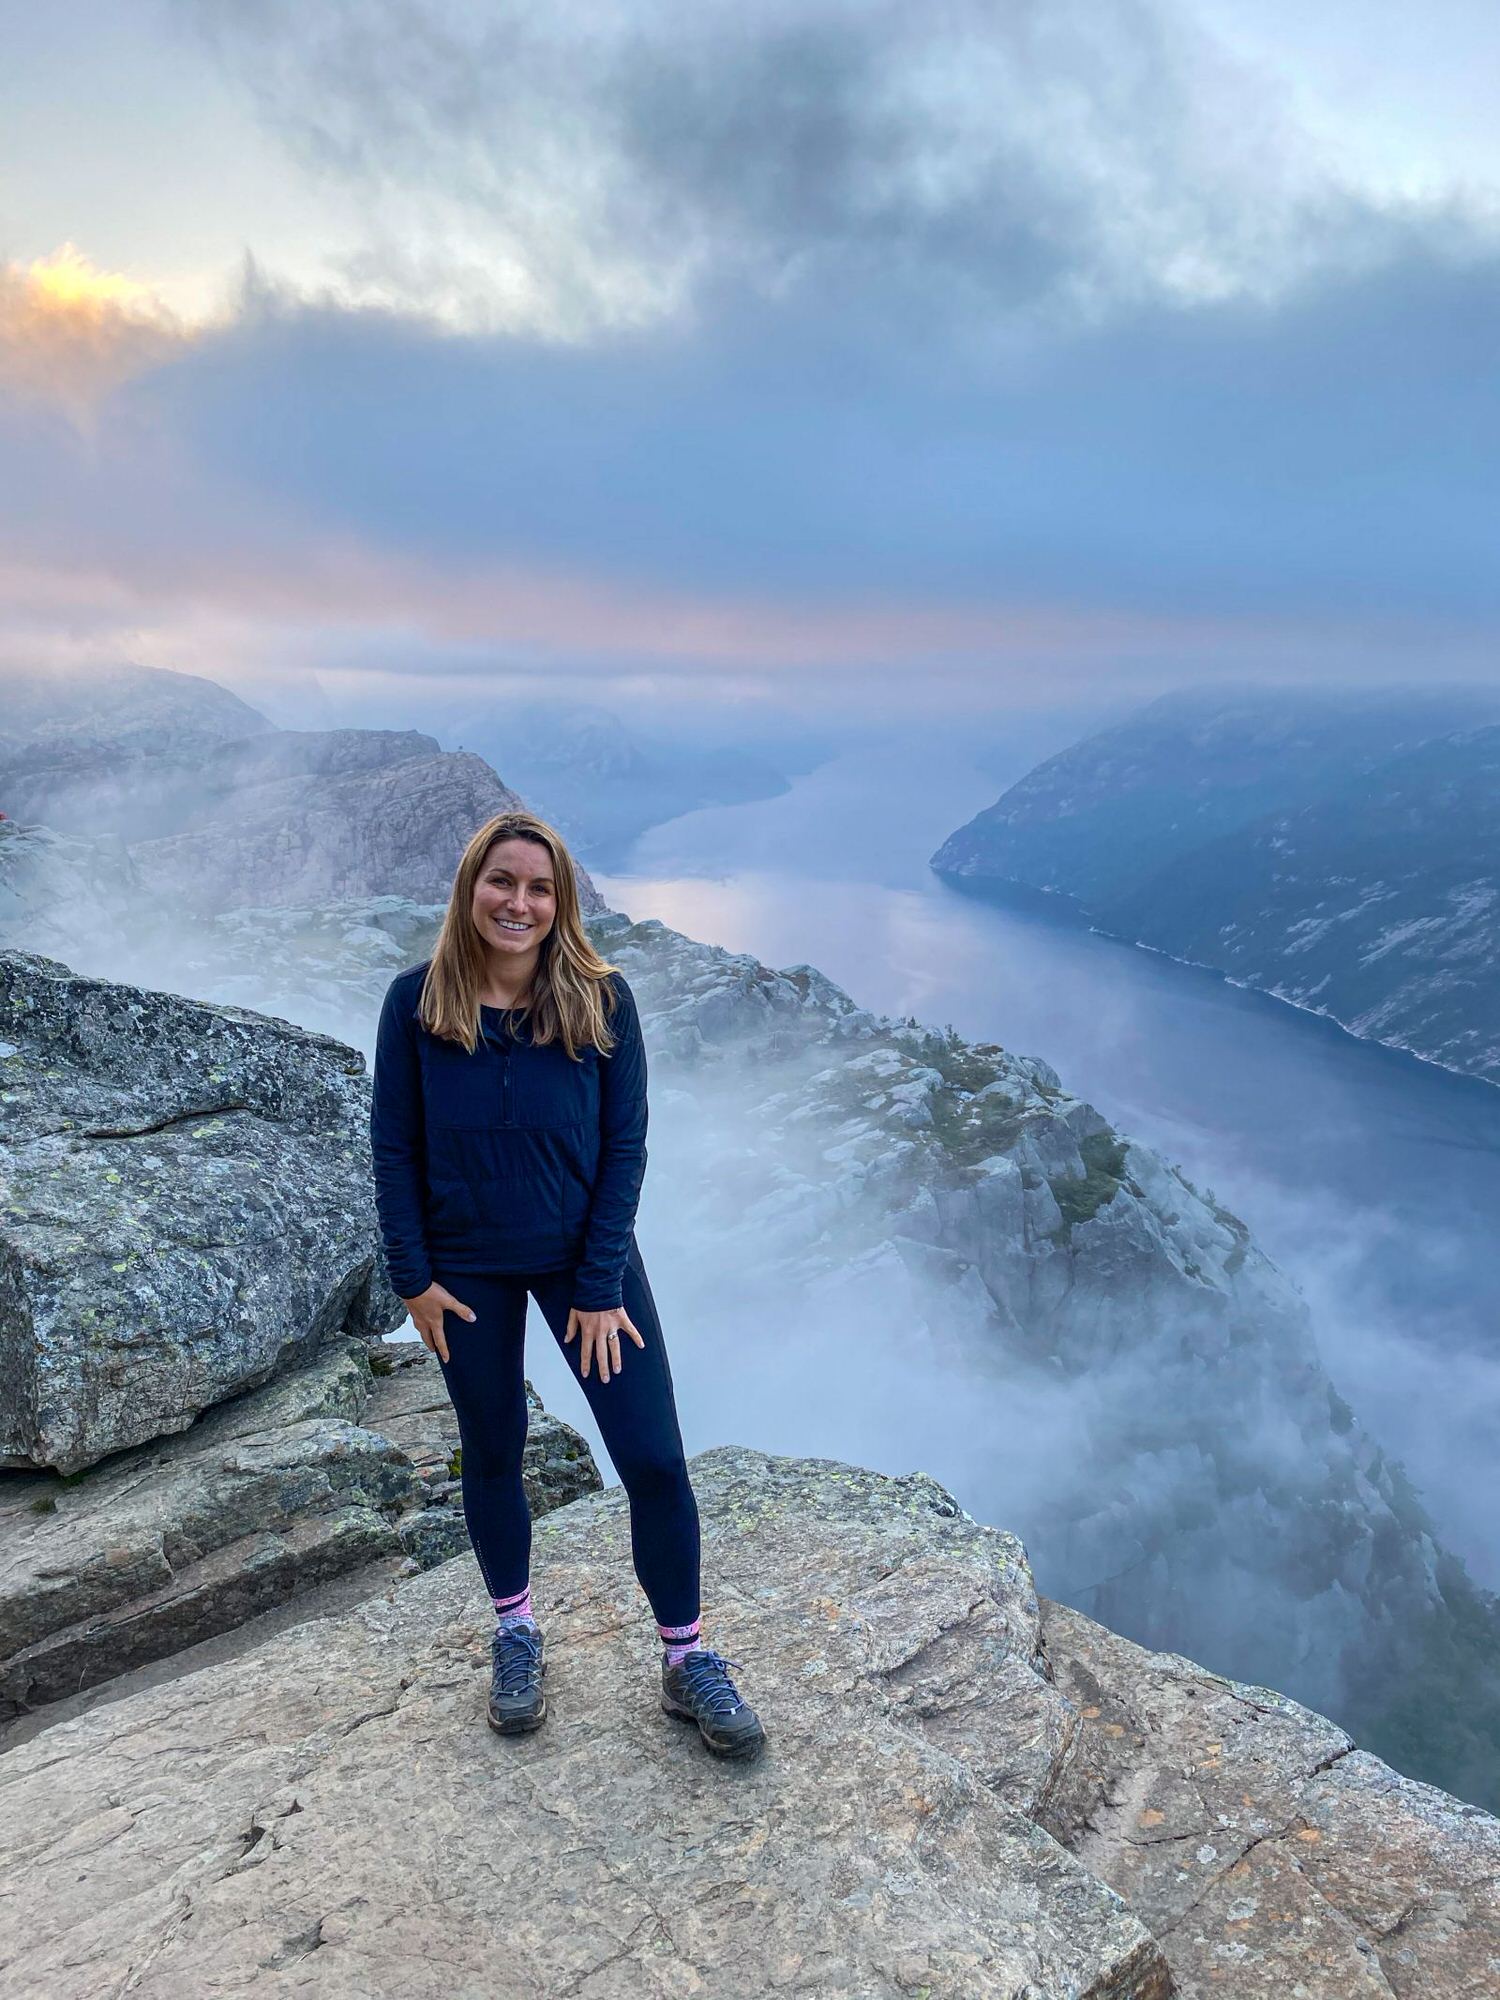 How to See Preikestolen Without the Crowds